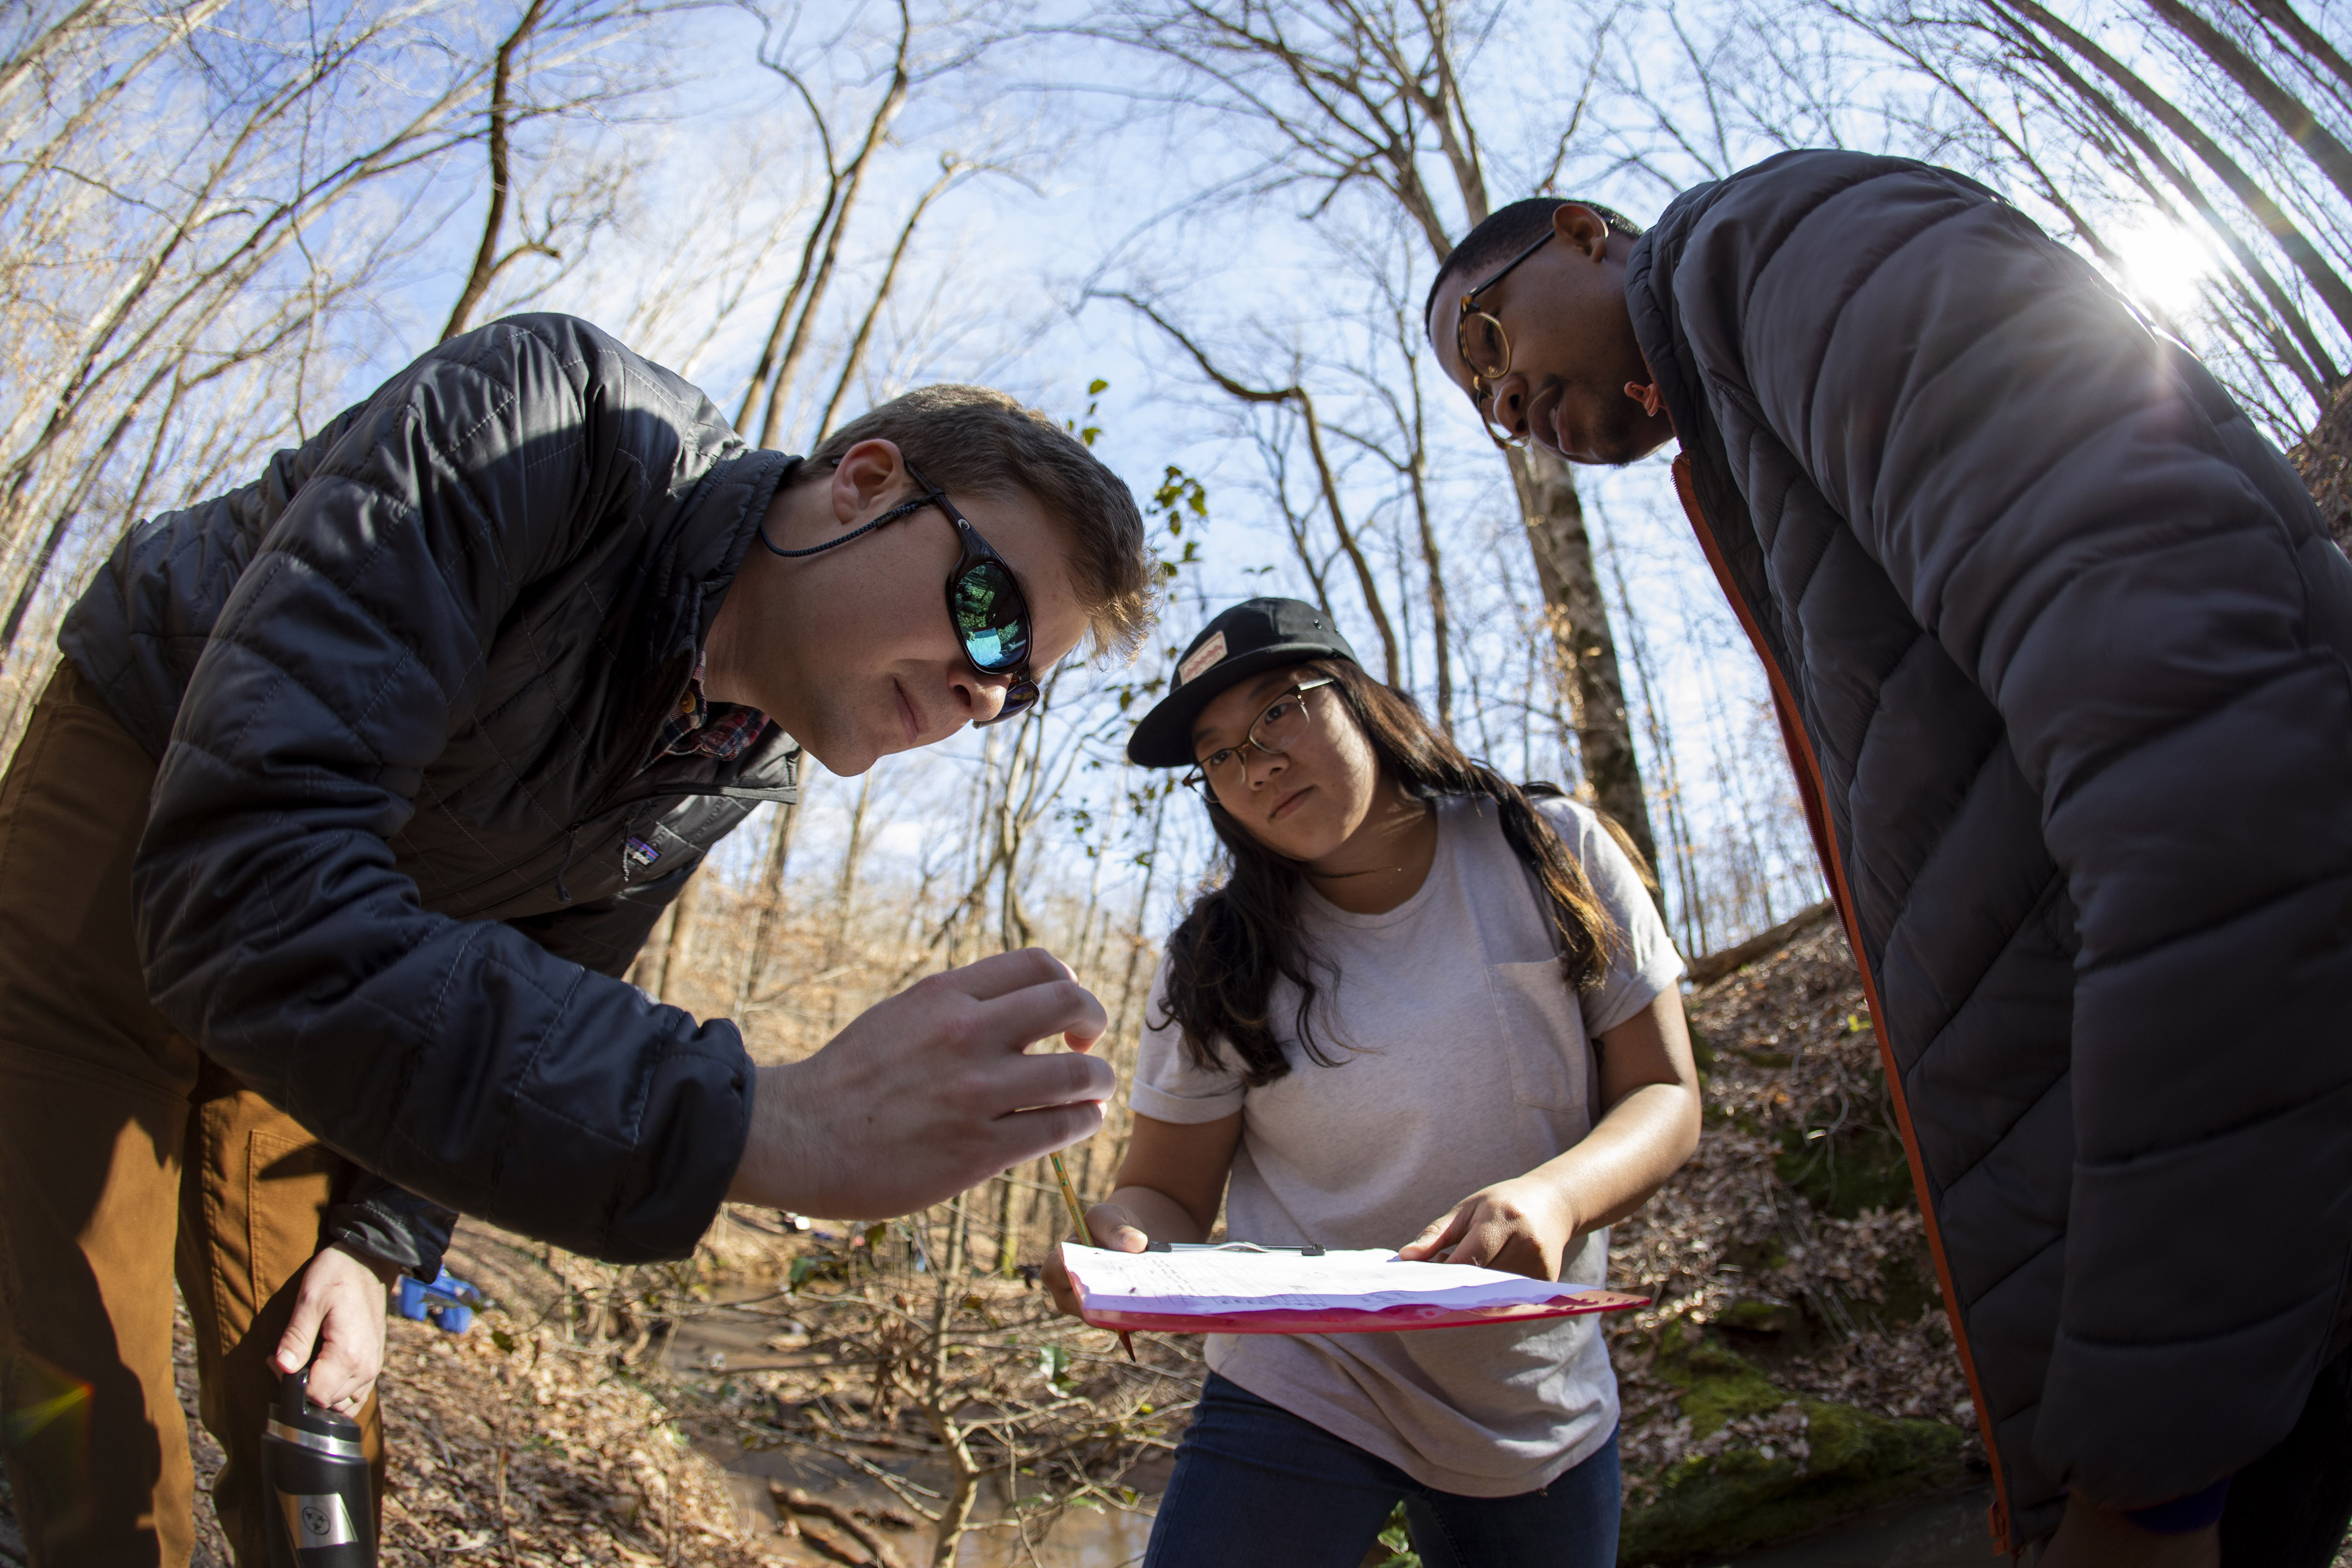 (L-R) Teaching assistant and PhD student Bryan Bozeman looks at a small animal with undergraduates Josephine Tam and Martin as the look for small animals and bugs as they sample as part of their Stream Ecology Lab in a stream off the orange trail at the State Botanical Gardens.